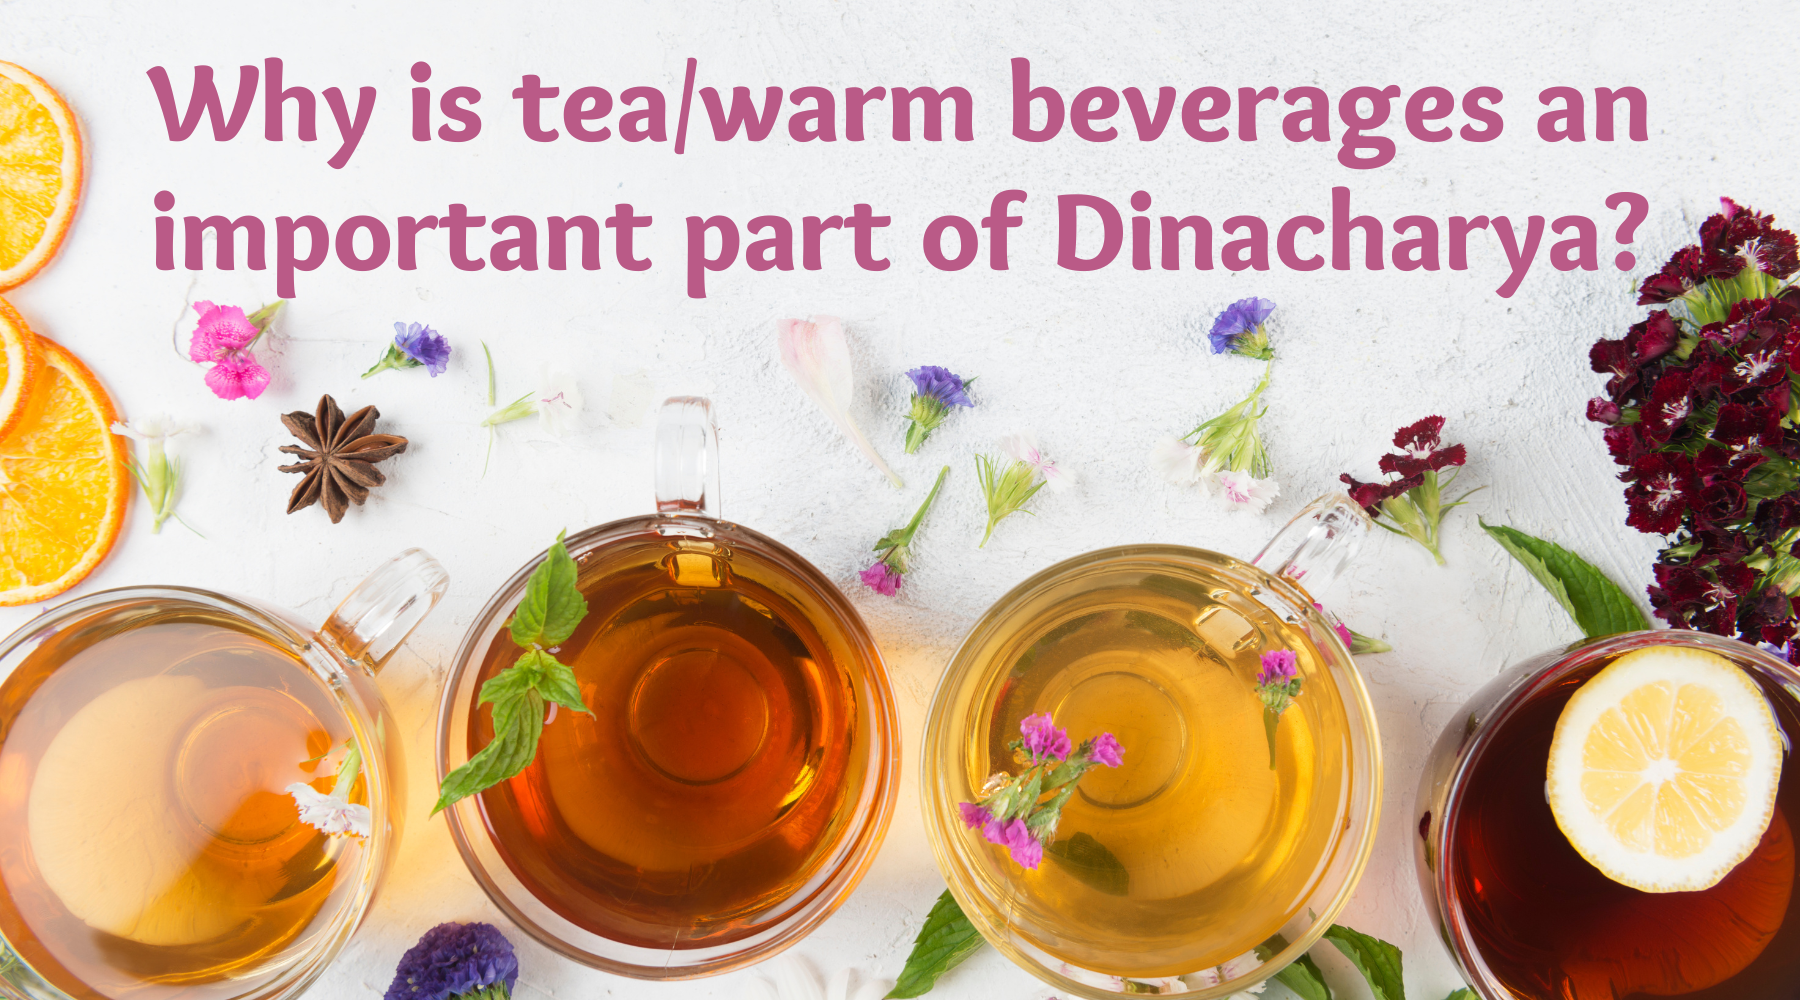 Why is tea/warm beverages an important part of Dinacharya?